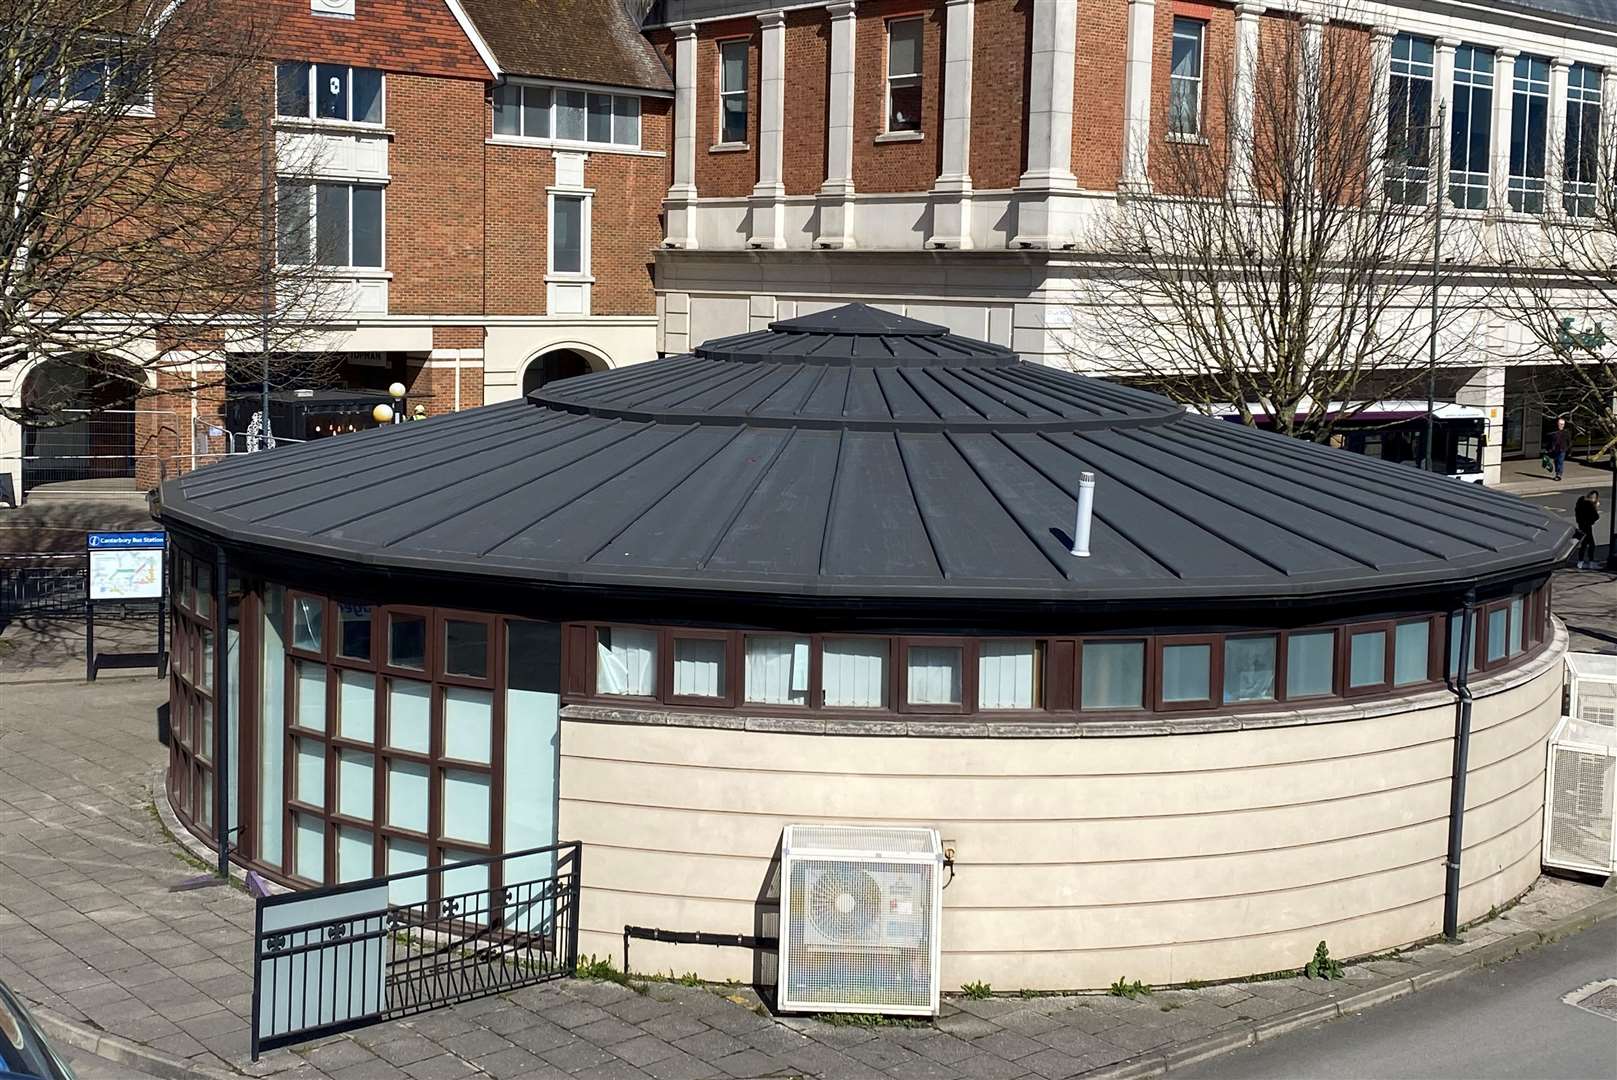 Plans have been unveiled to transform the building at Canterbury bus station into a bubble tearoom